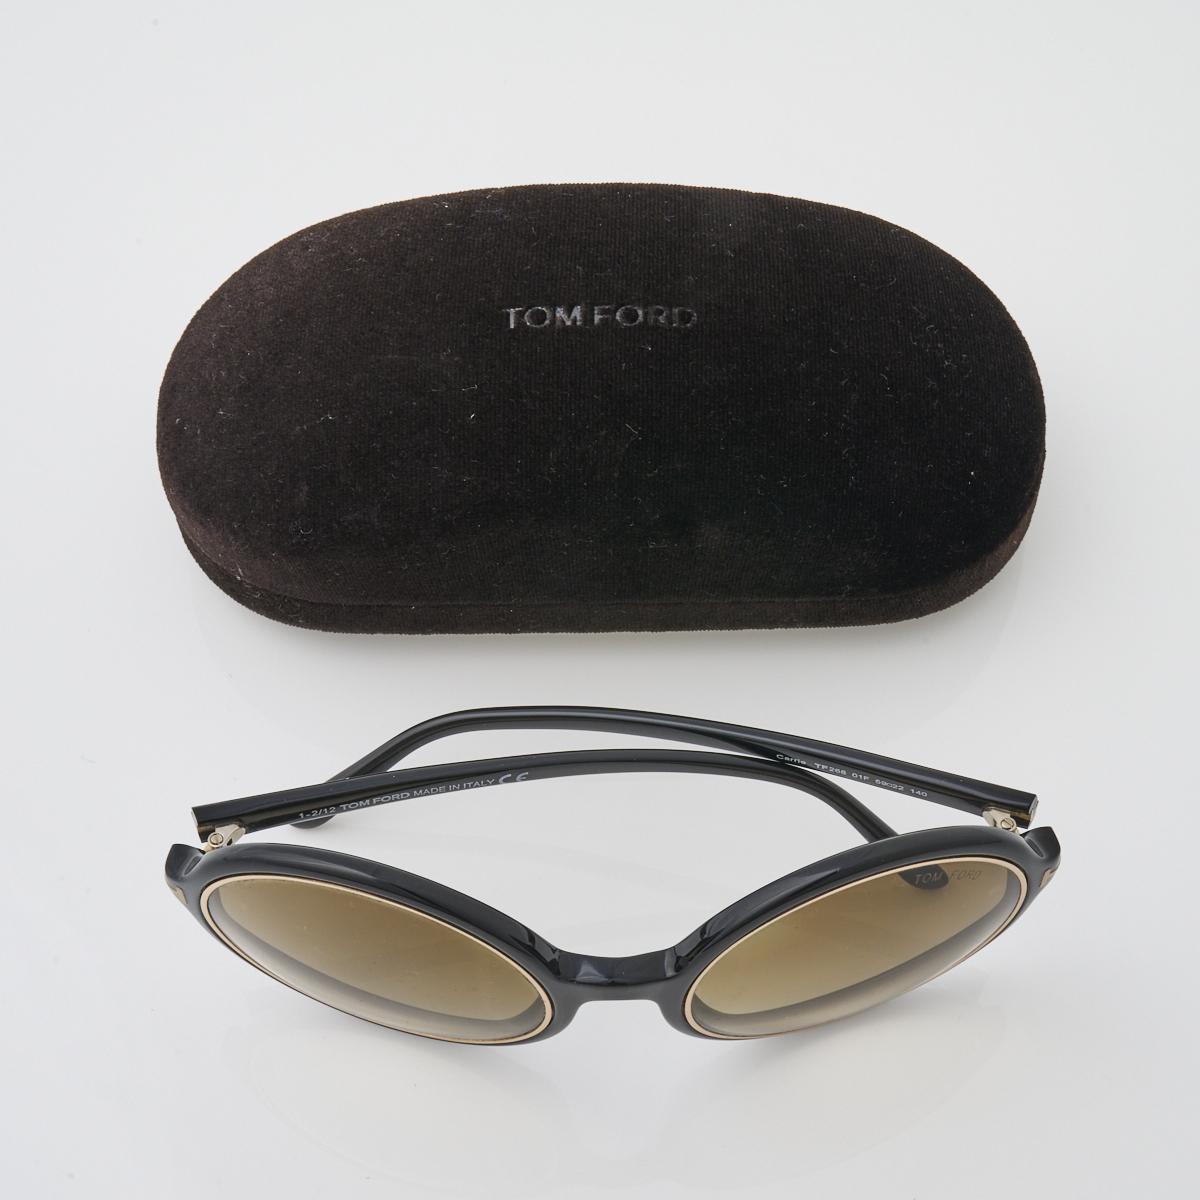 Tom Ford Carrie Sunglasses with Case and Box